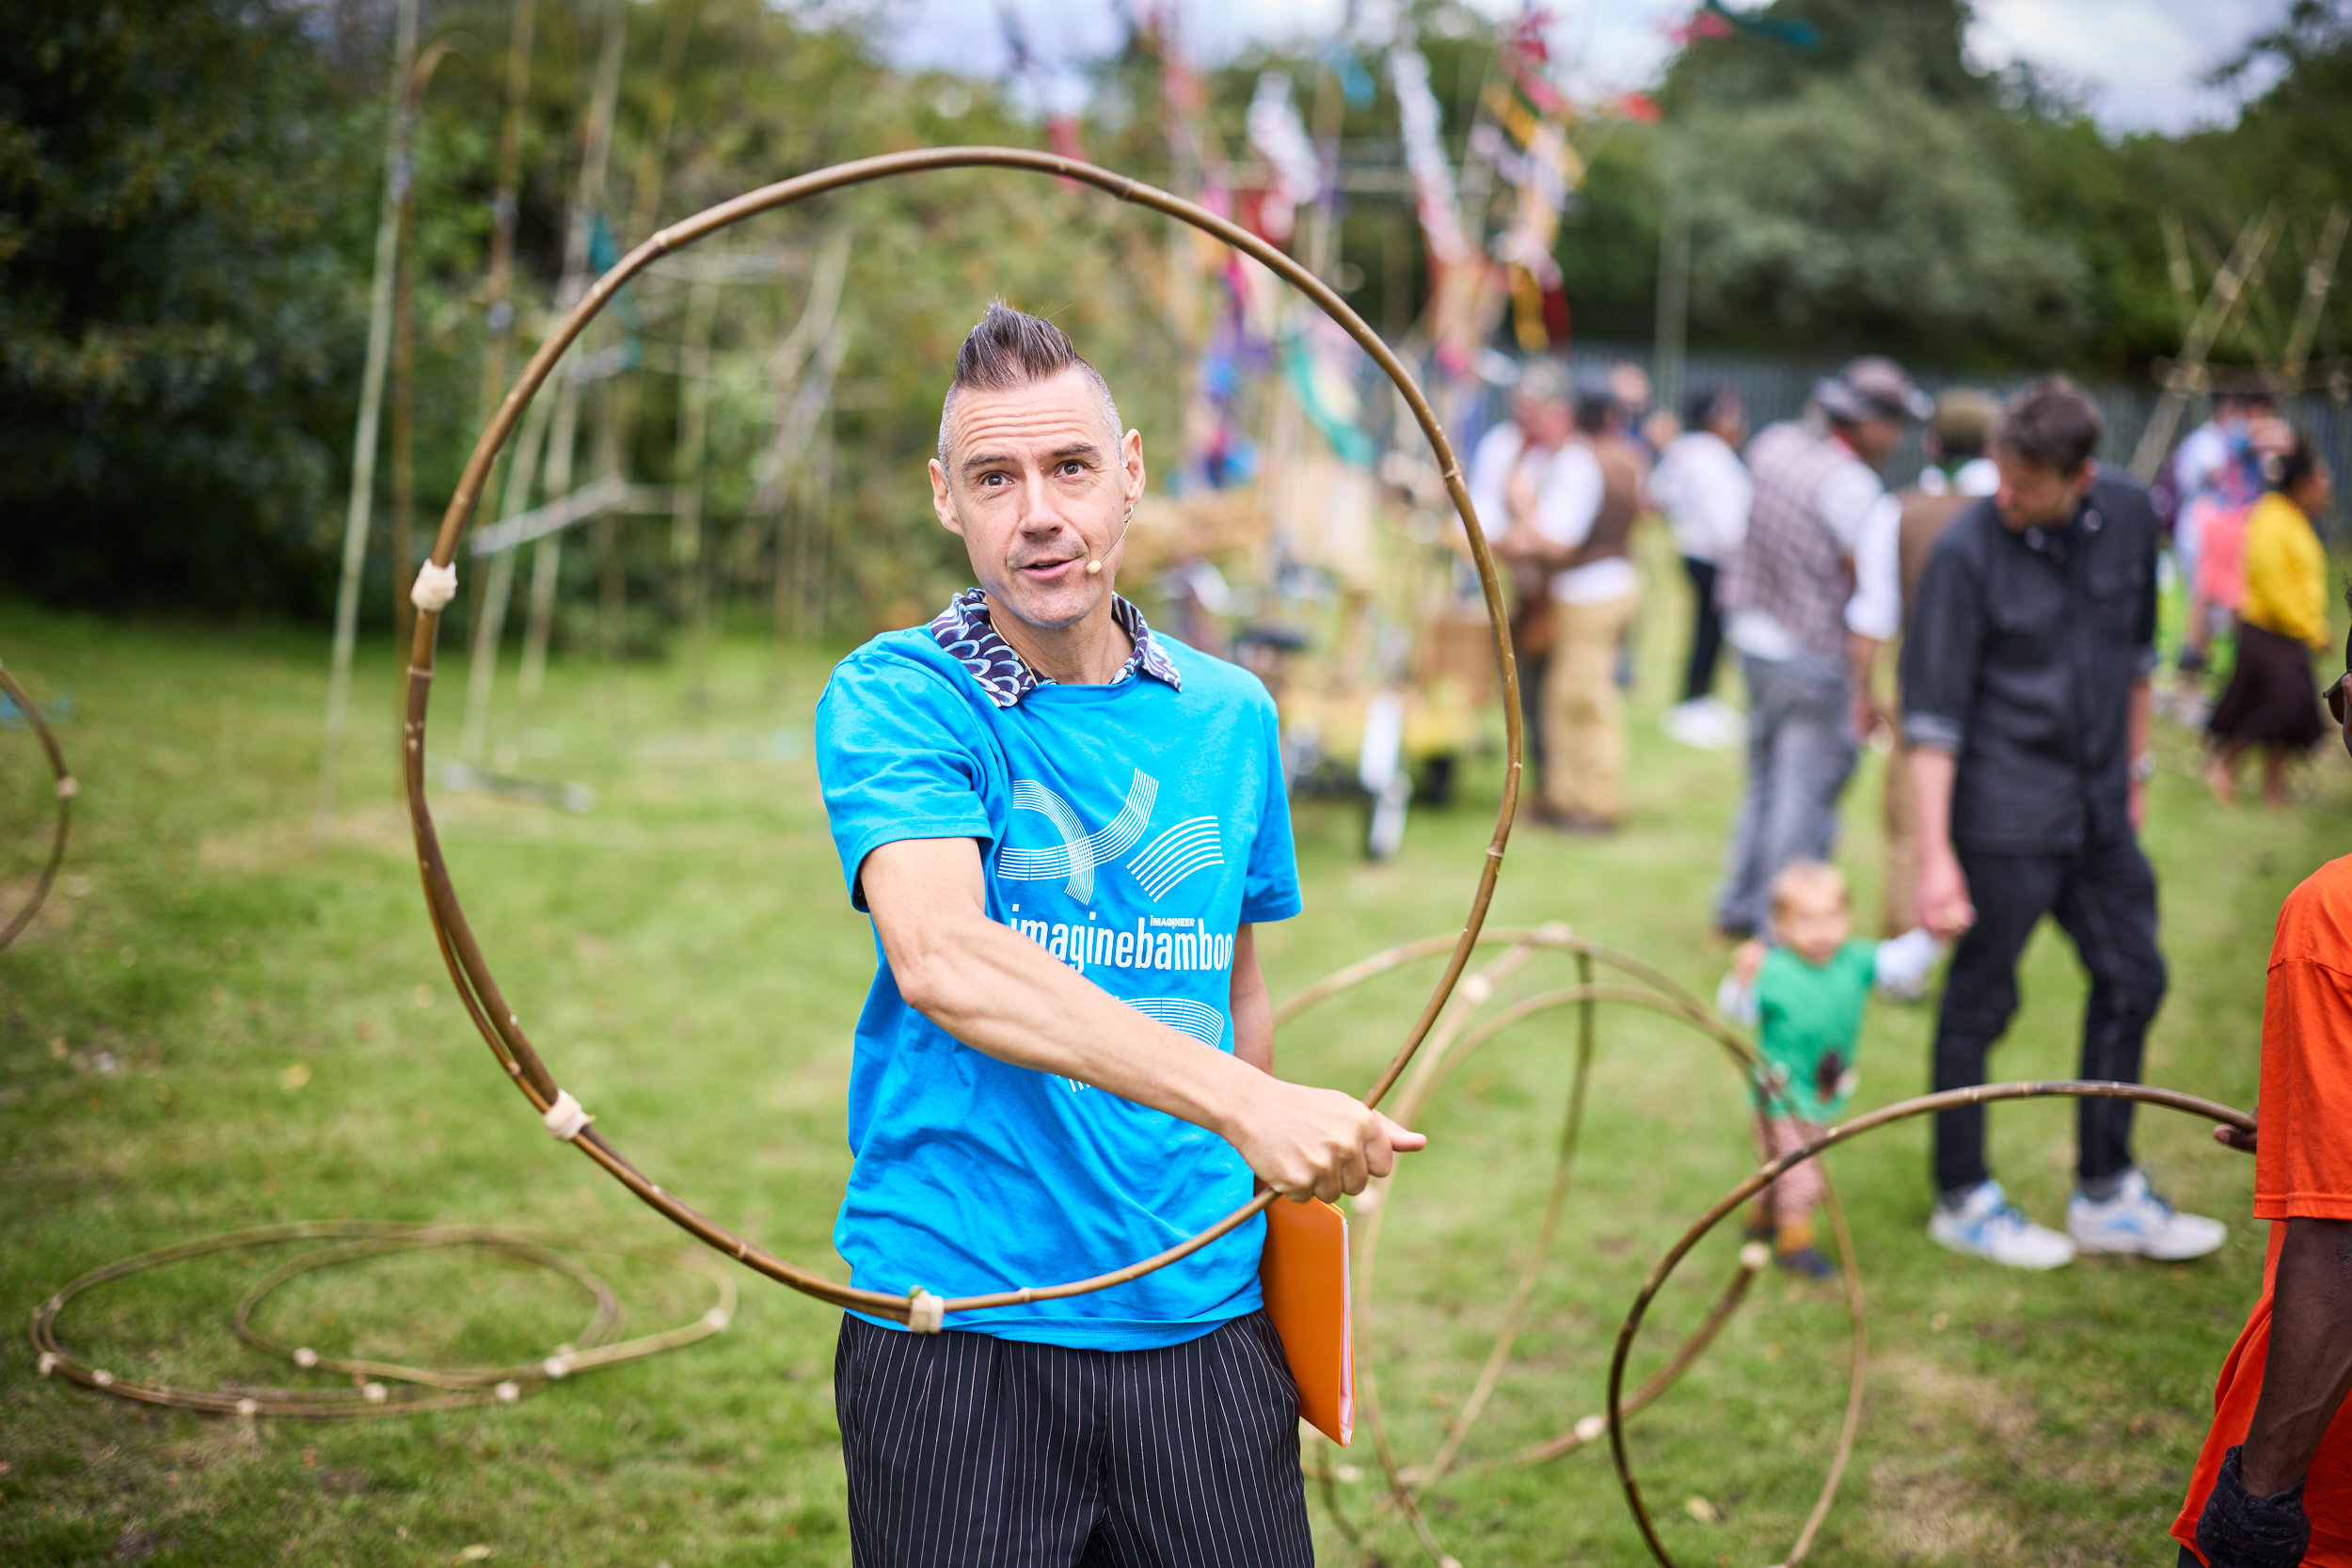 A man holds a hula hoop made of bamboo